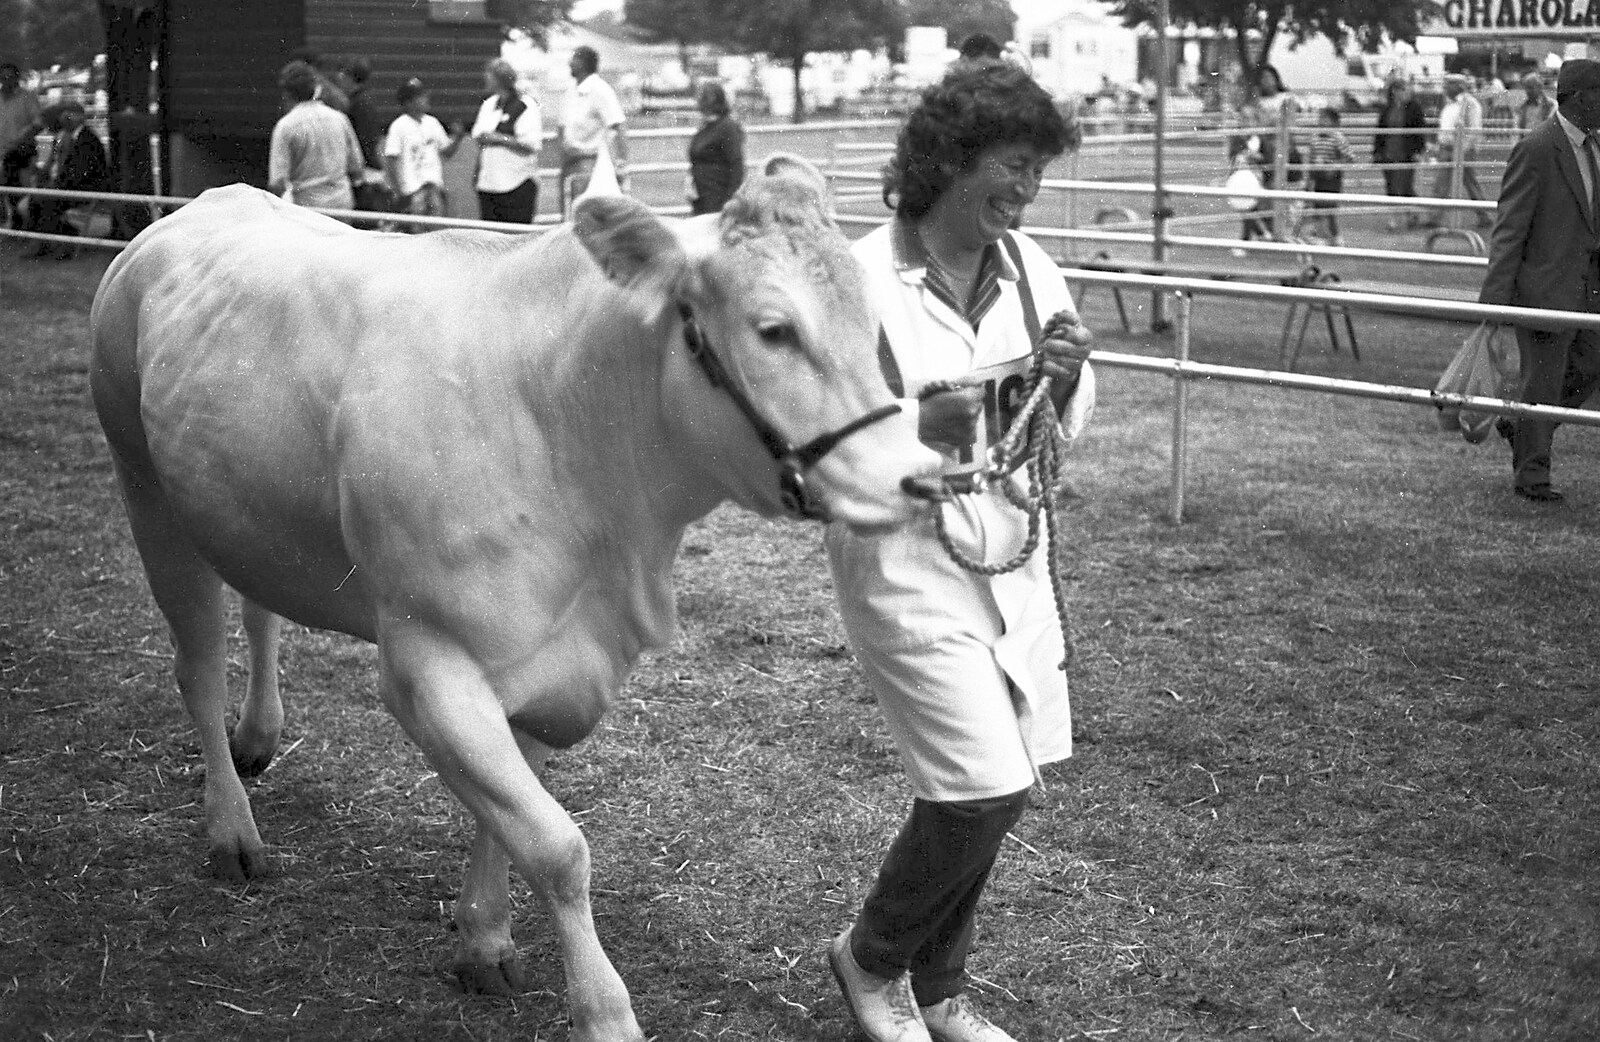 A cow goes for a walk from The Royal Norfolk Show, Costessey Showground, Norwich - June 20th 1994